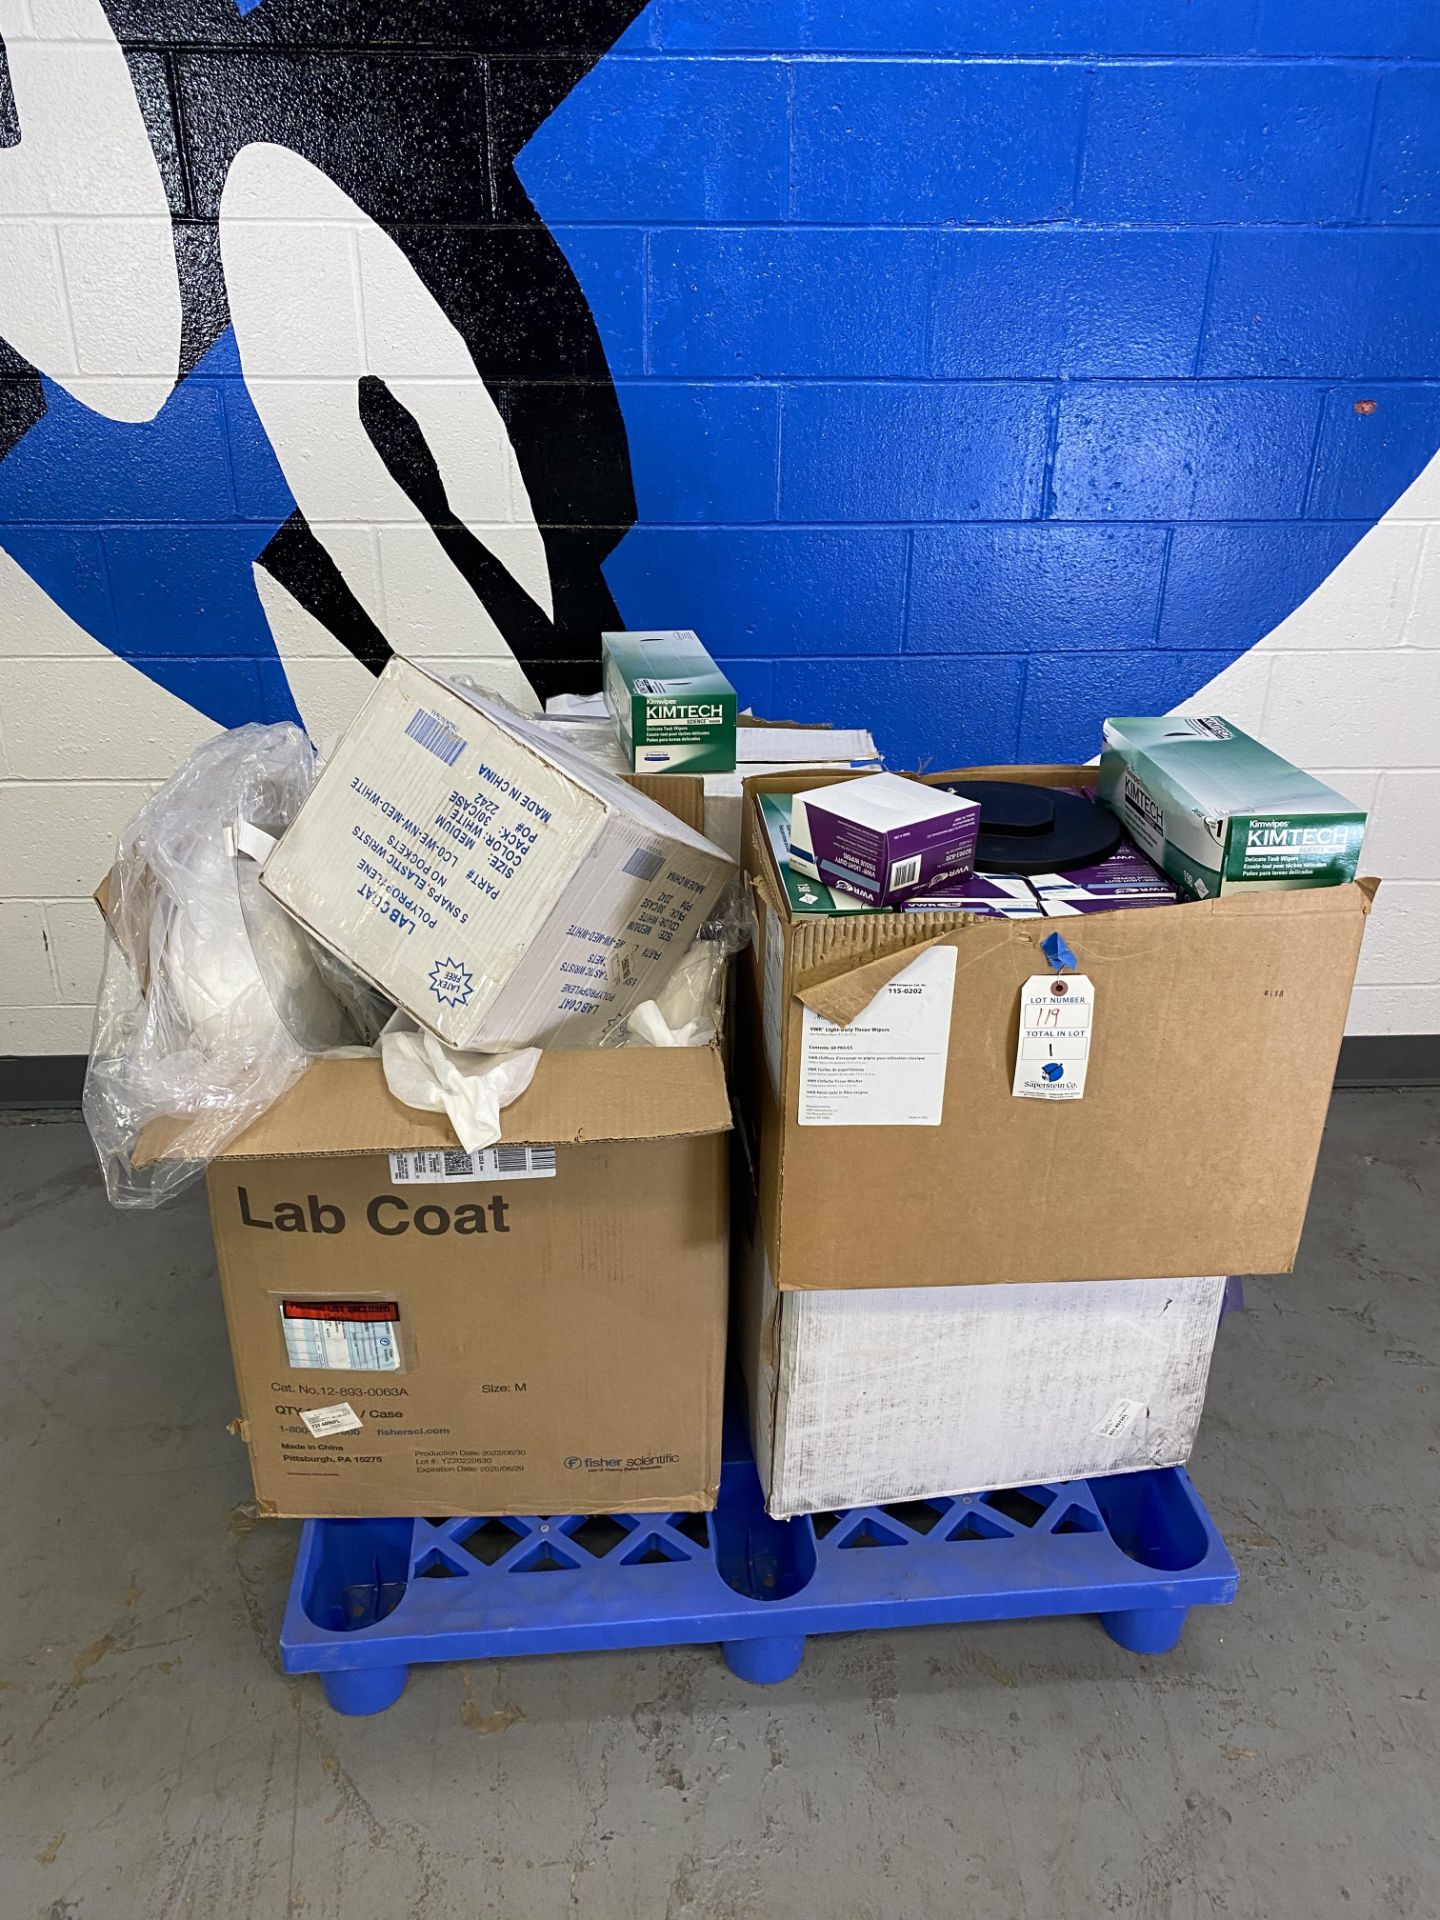 {LOT} Of Consumables on Pallet of Approx. 7 Boxes c/o: DNA/RNA Assorted Kits (AS IS), Assorted Lab